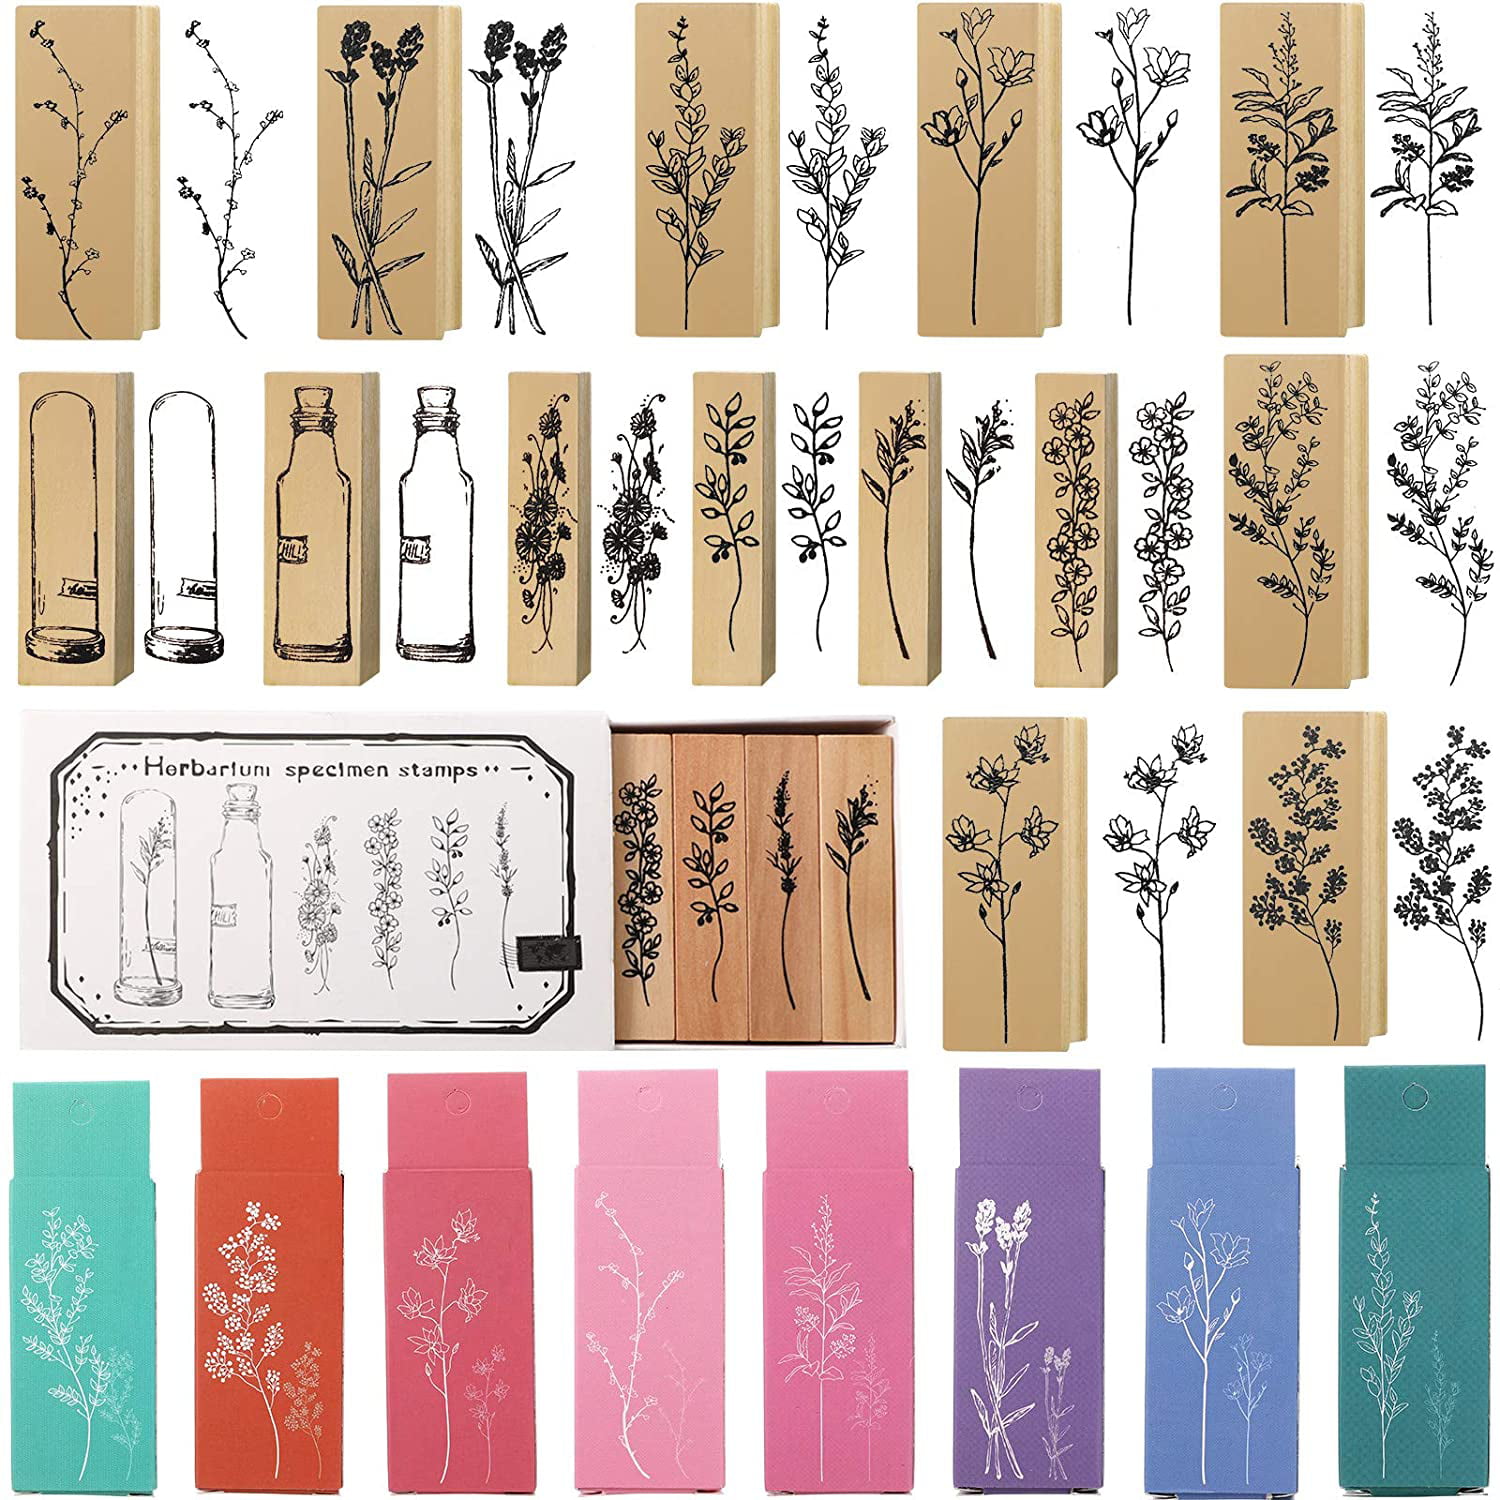 7 Pieces Vintage Wooden Rubber Stamps Plant and Flower Decorative Wooden Rubber Stamp Set for Journaling Crafting Scrapbooking and Card Making Adult Kids 